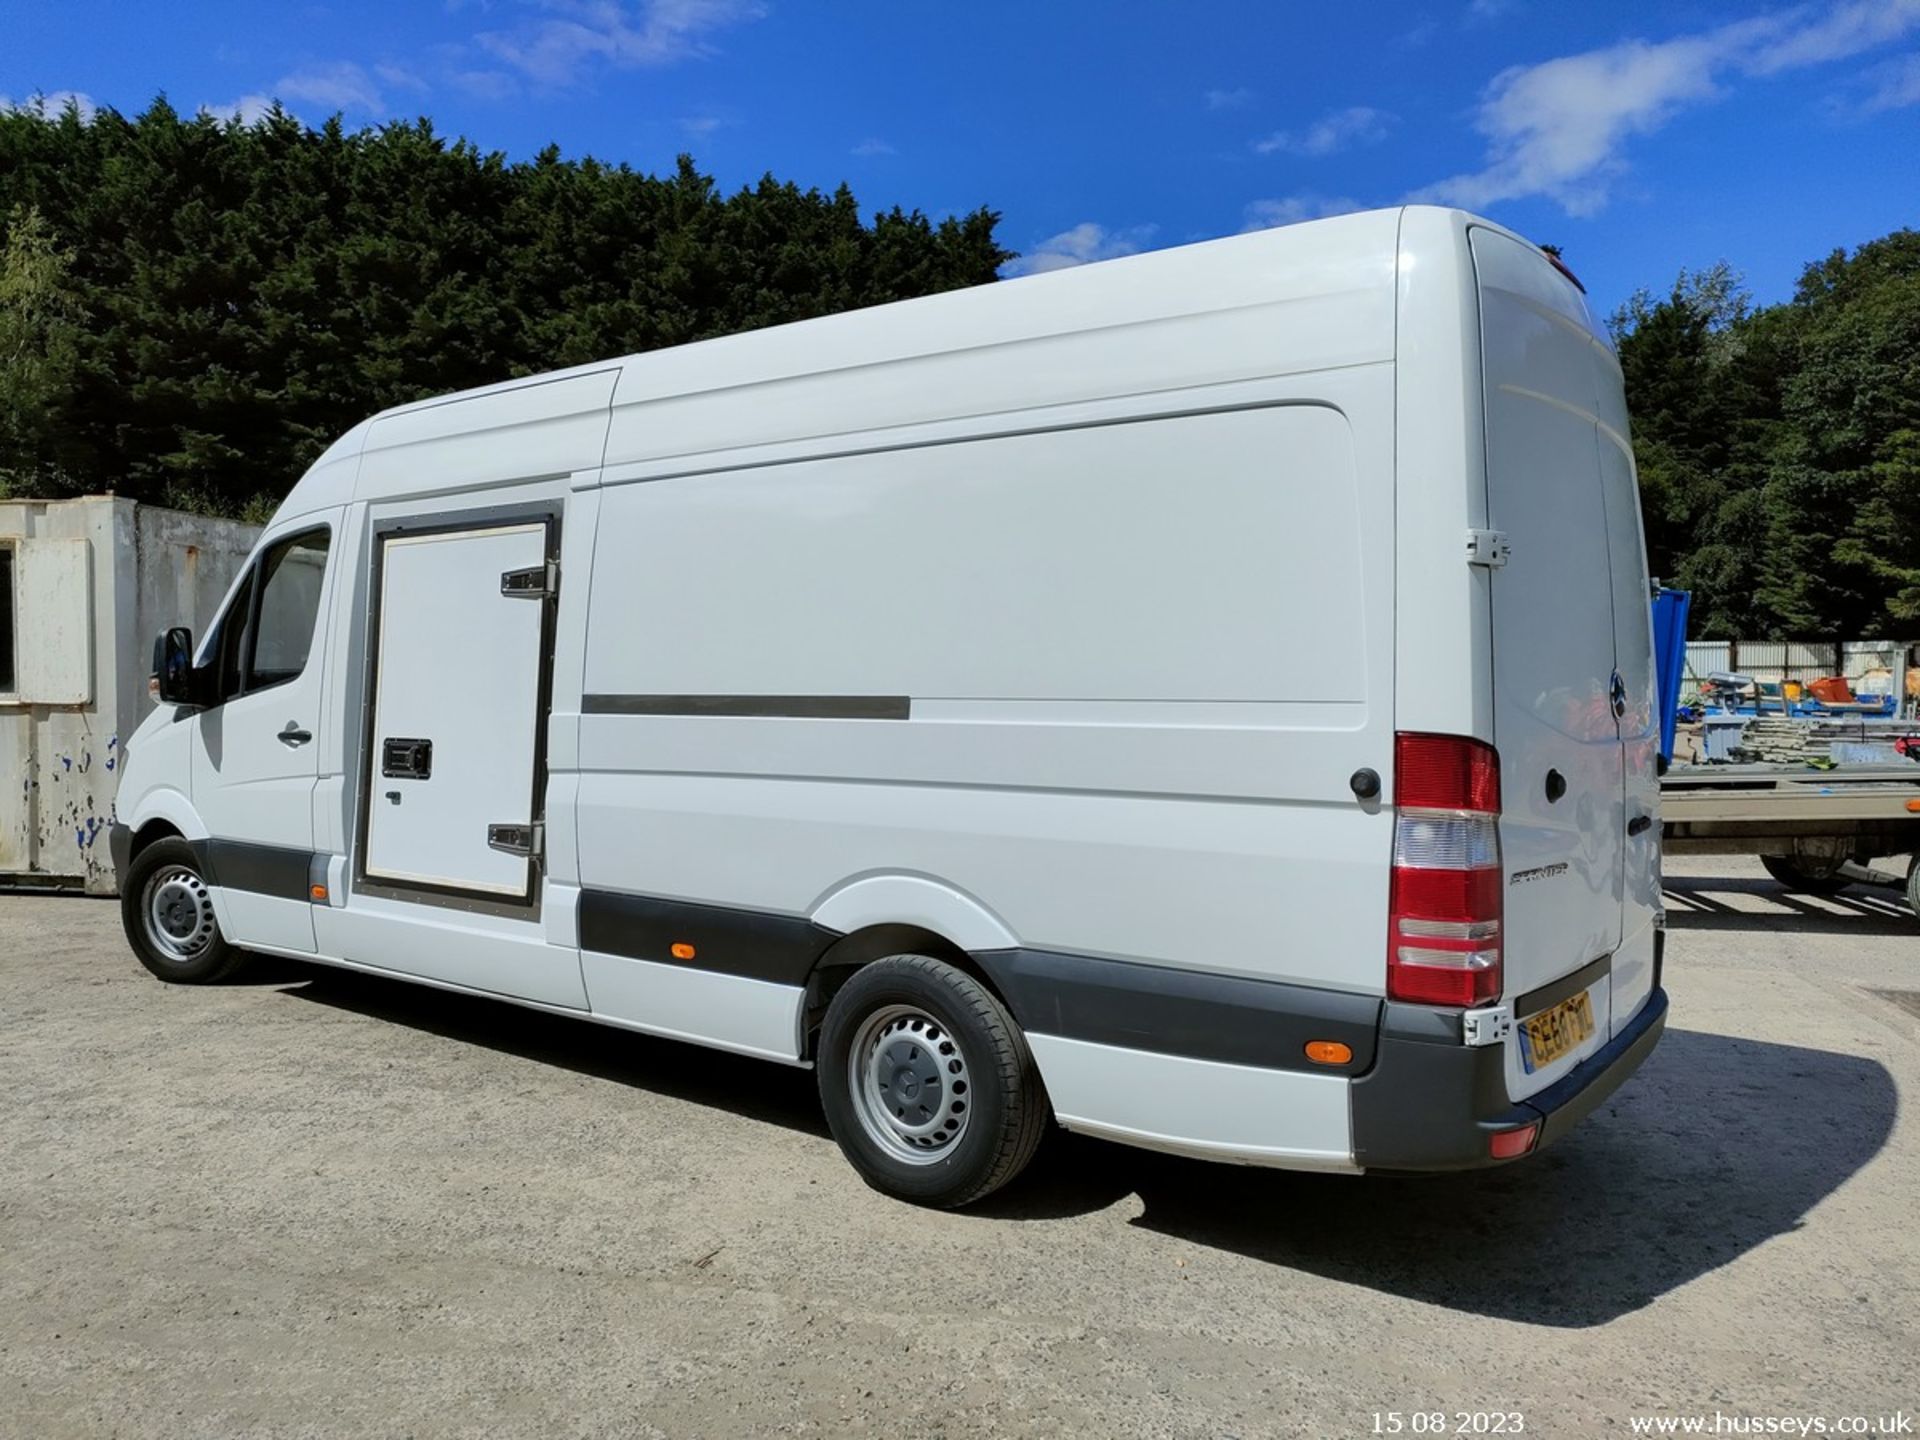 18/68 MERCEDES-BENZ SPRINTER 314CDI - 2143cc 5dr Refrigerated (White) - Image 4 of 40